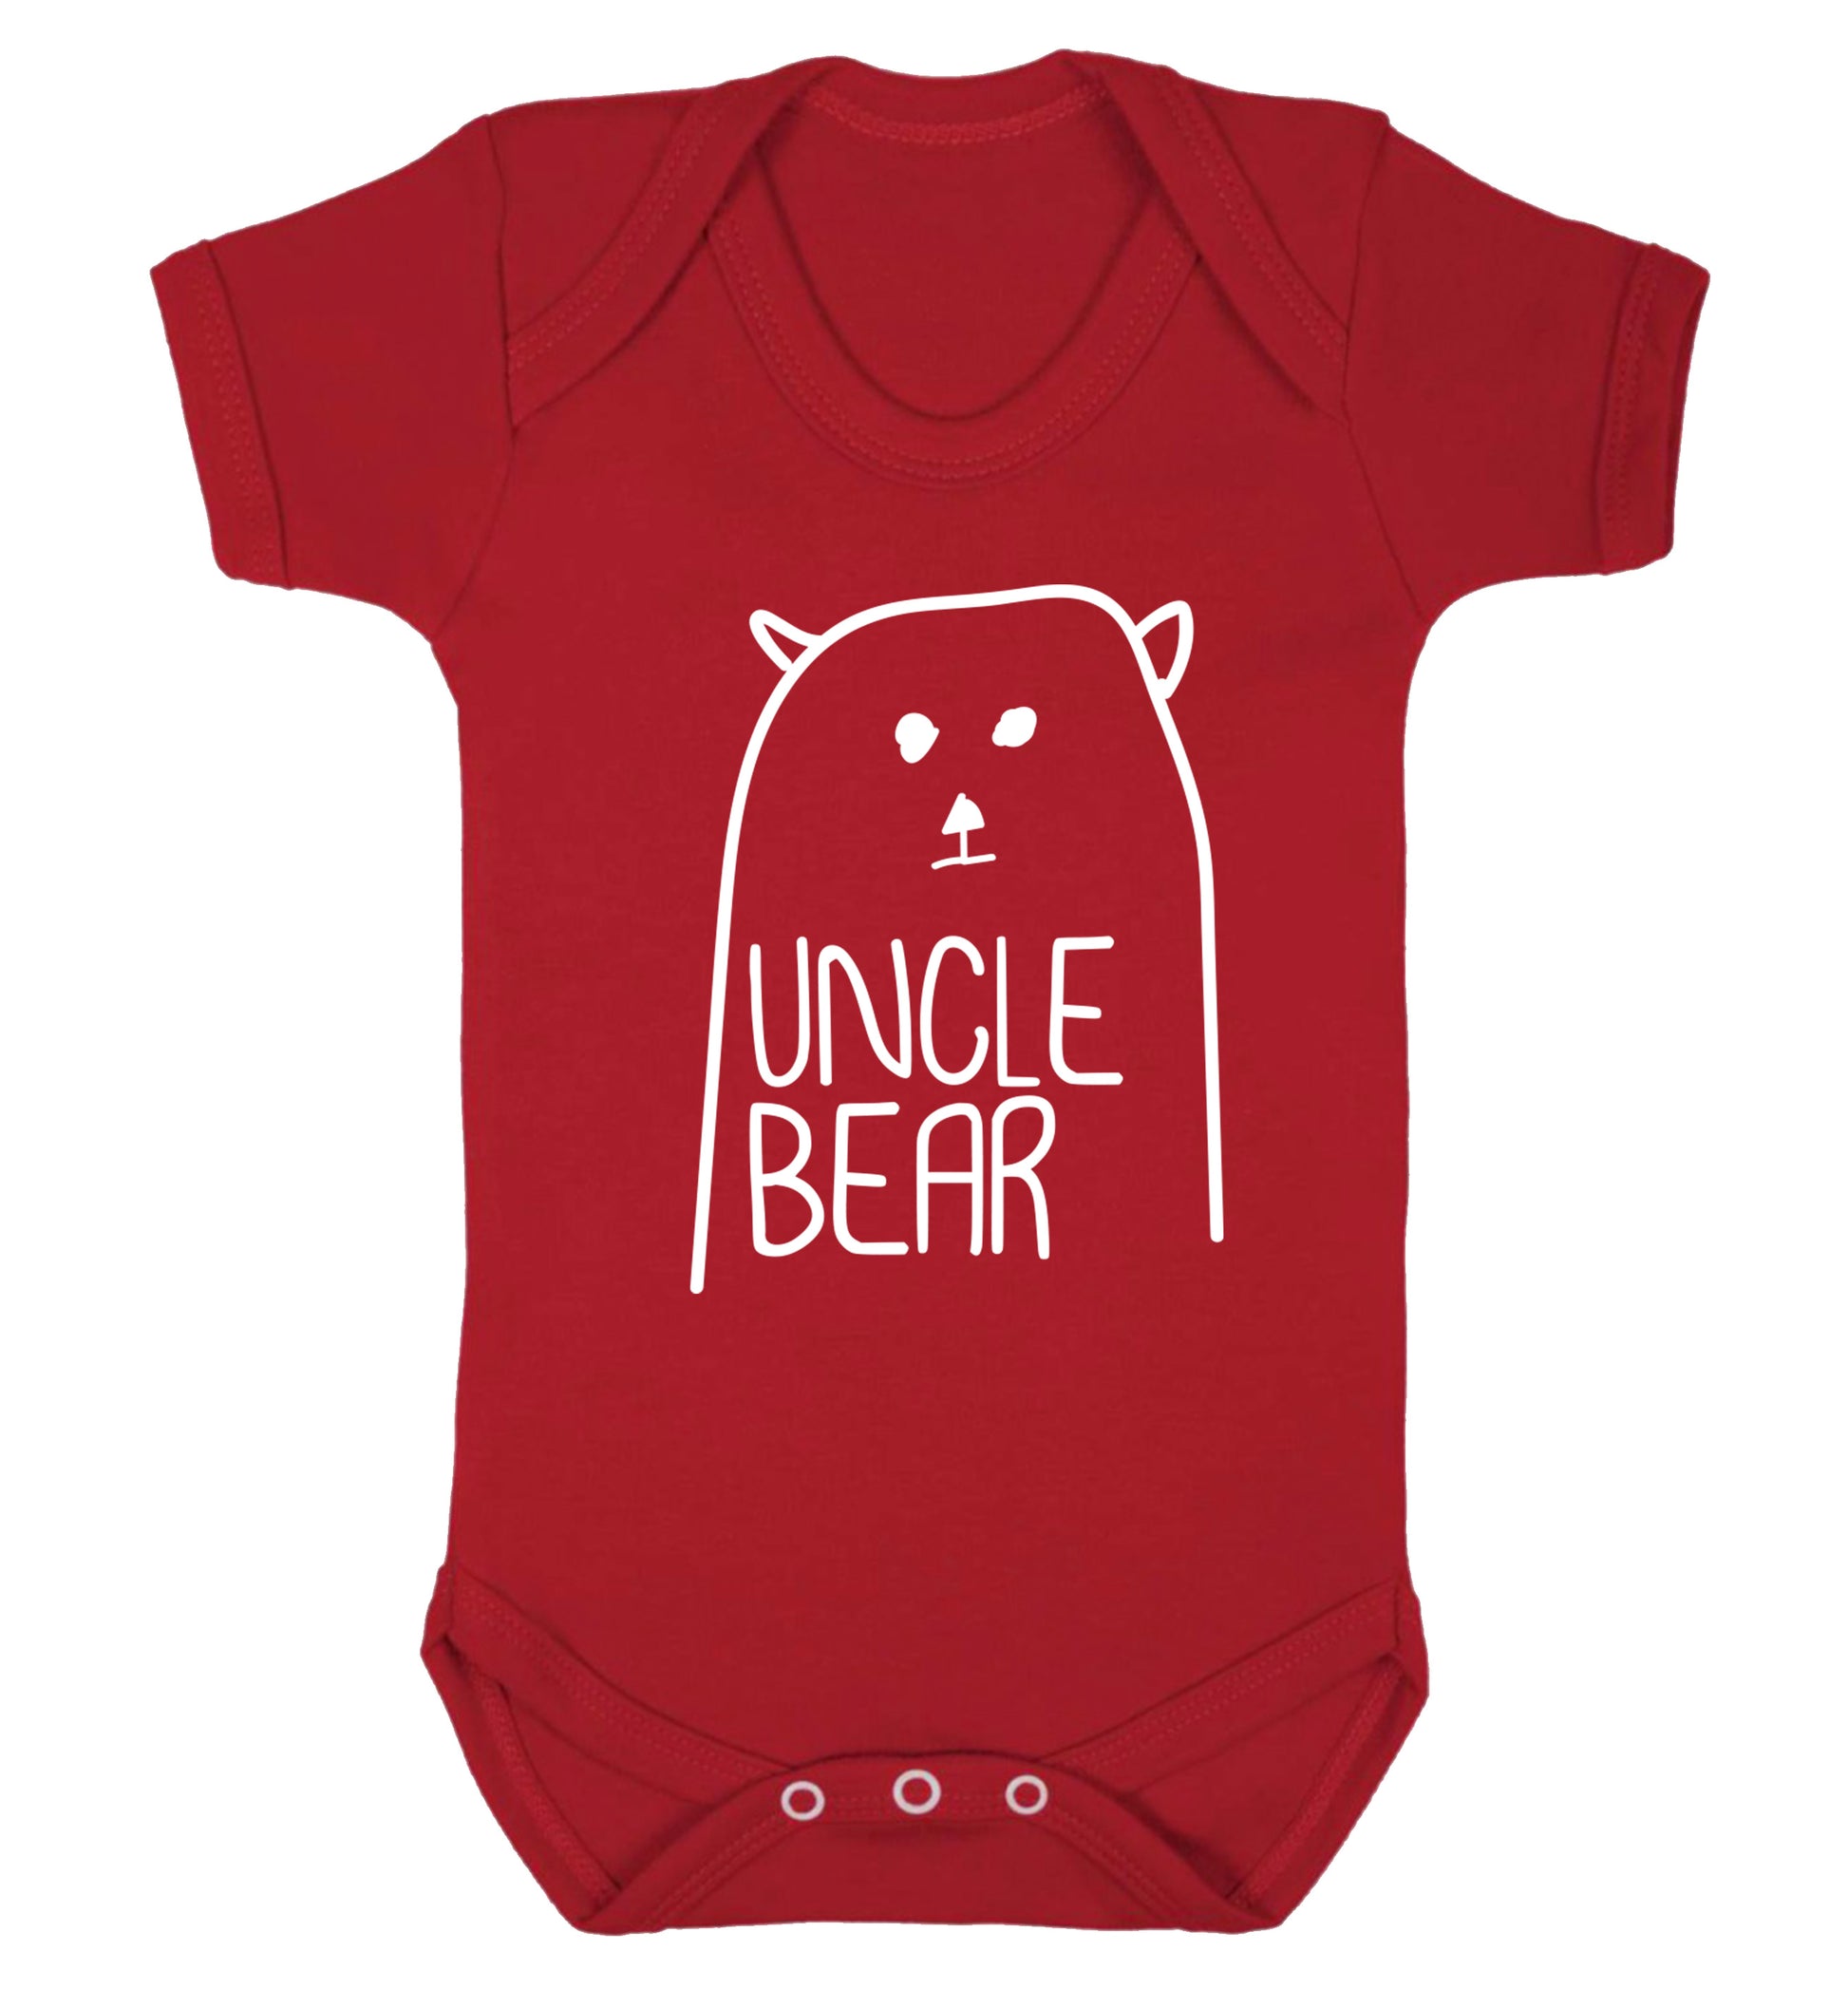 Uncle bear Baby Vest red 18-24 months